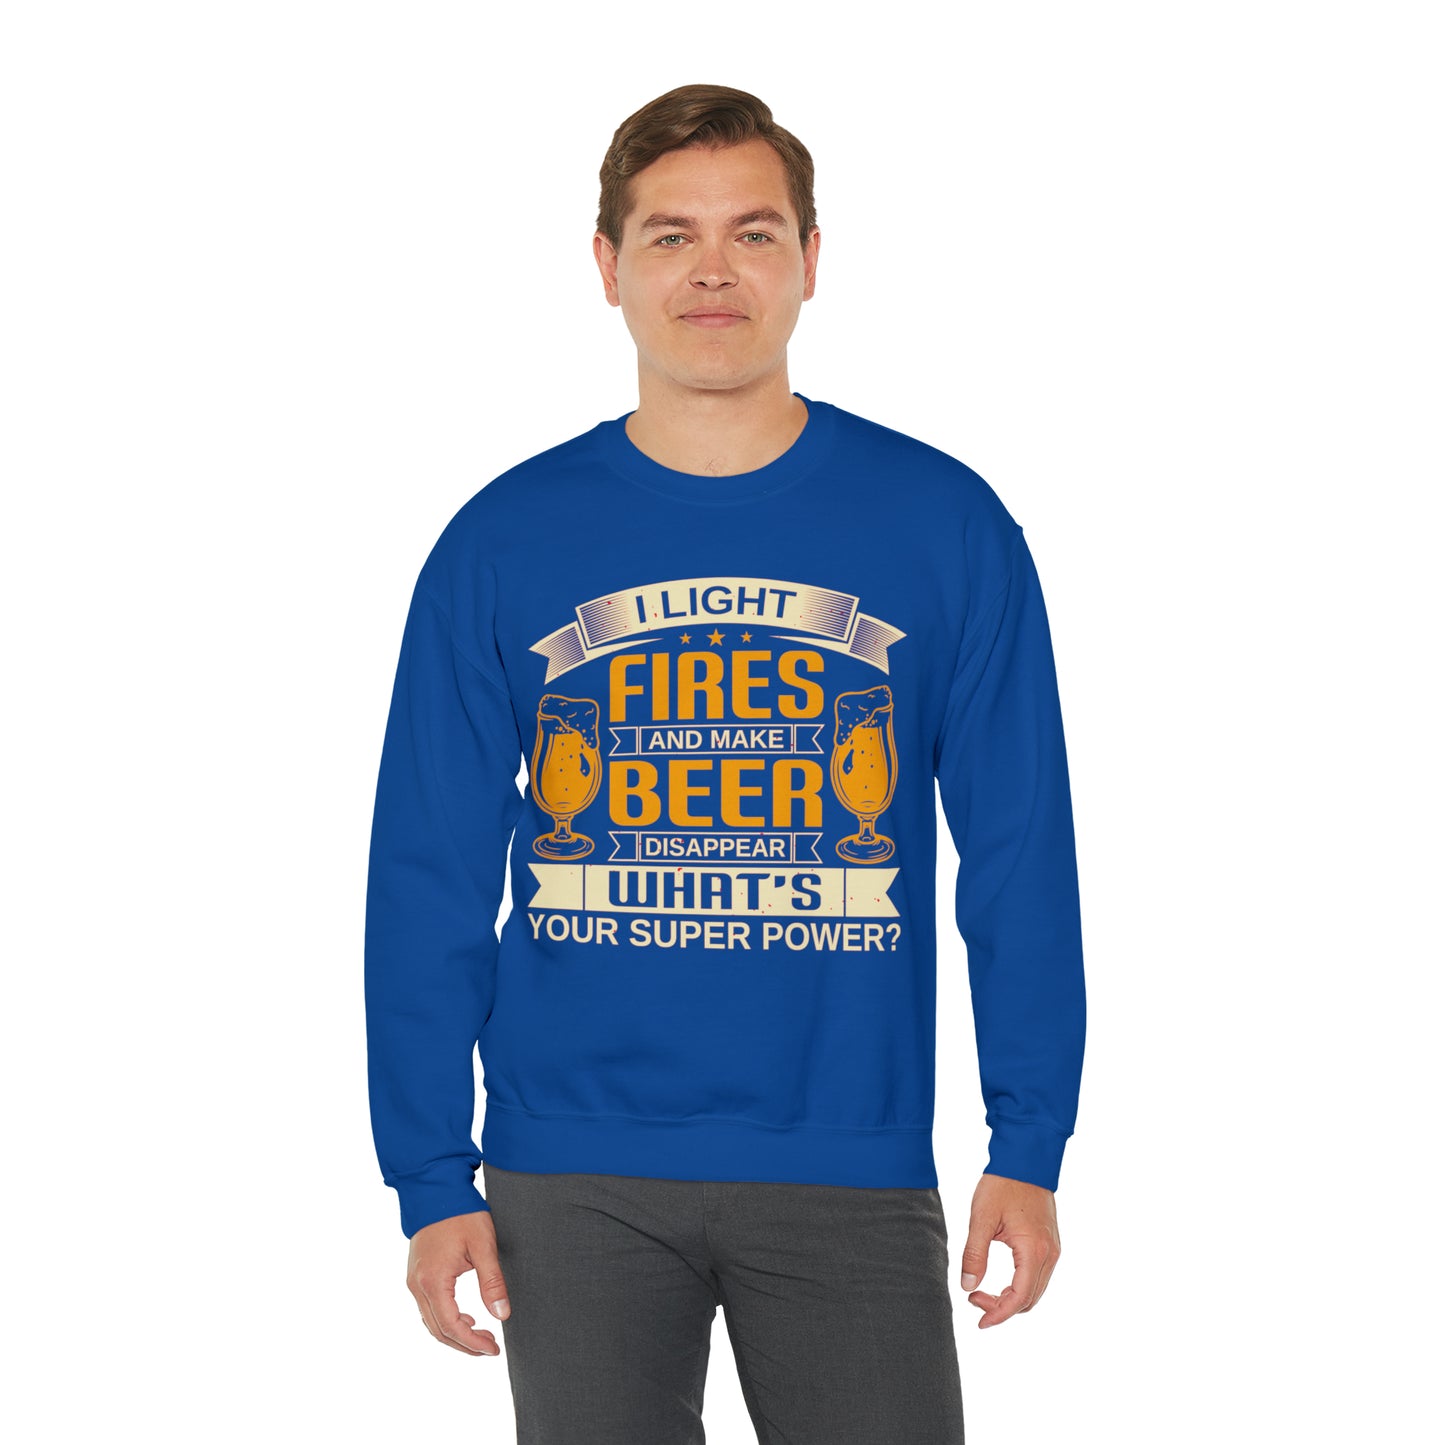 I light Fires And Make Beer Sweatshirt for Men, Electrician Sweatshirt for Fathers Day, Funny Shirt for Electrician Gift for Husband, S866